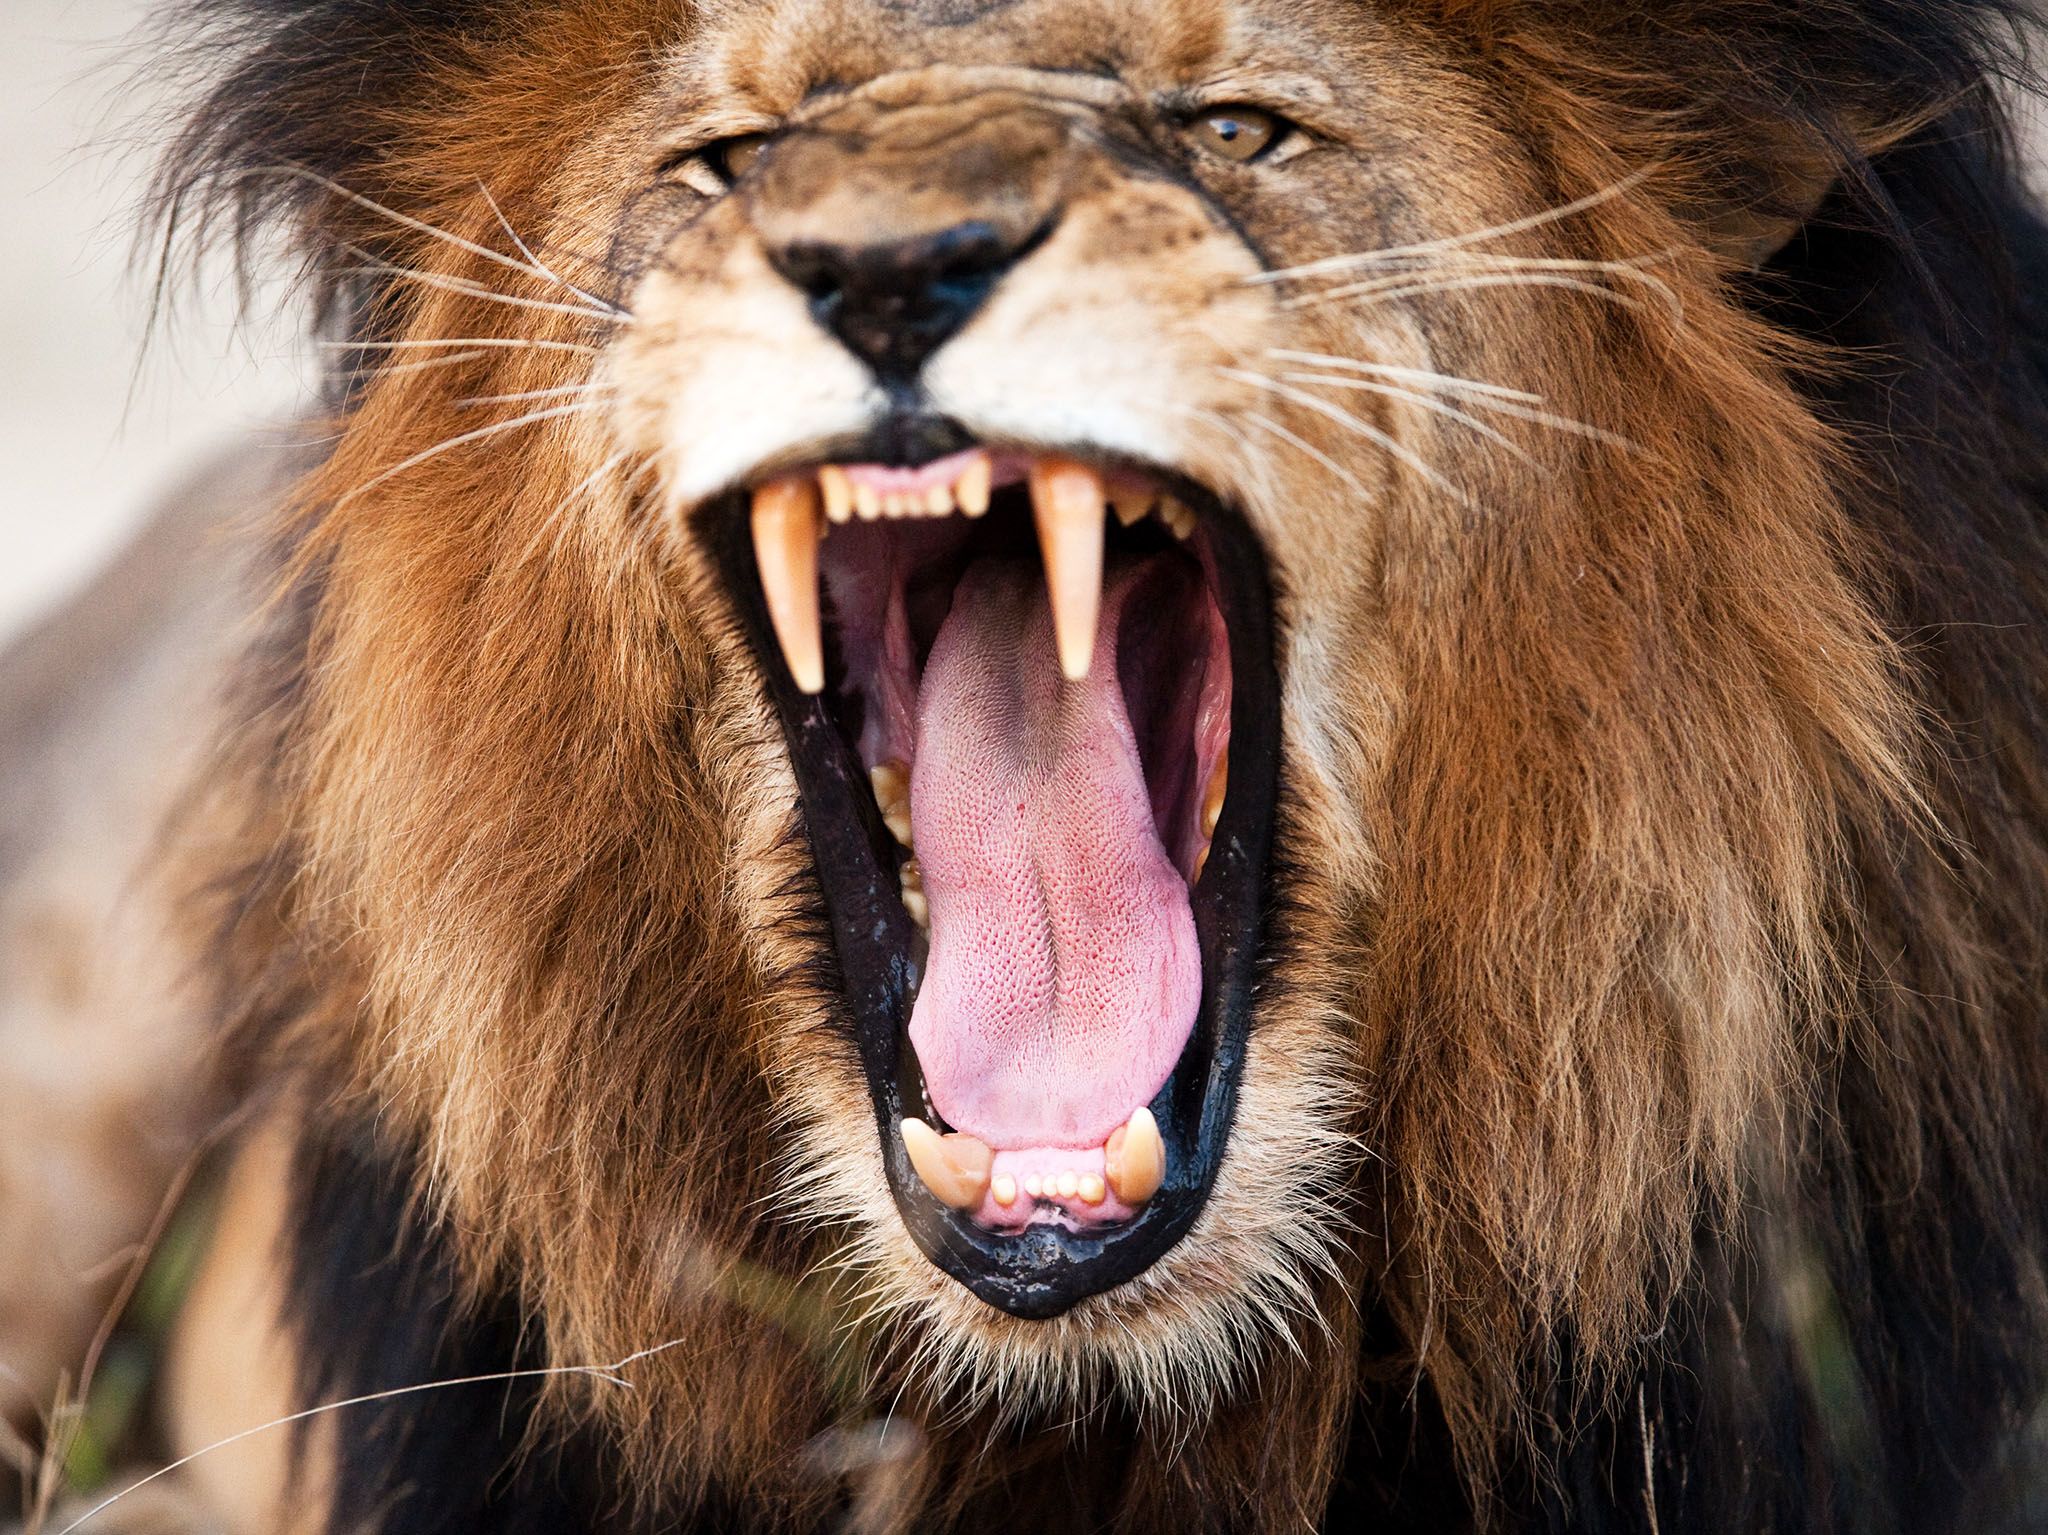 South Africa: An adult Lion's roar can be heard up to 5 miles (8 kilometres) away. This image is... [Photo of the day - May 2017]